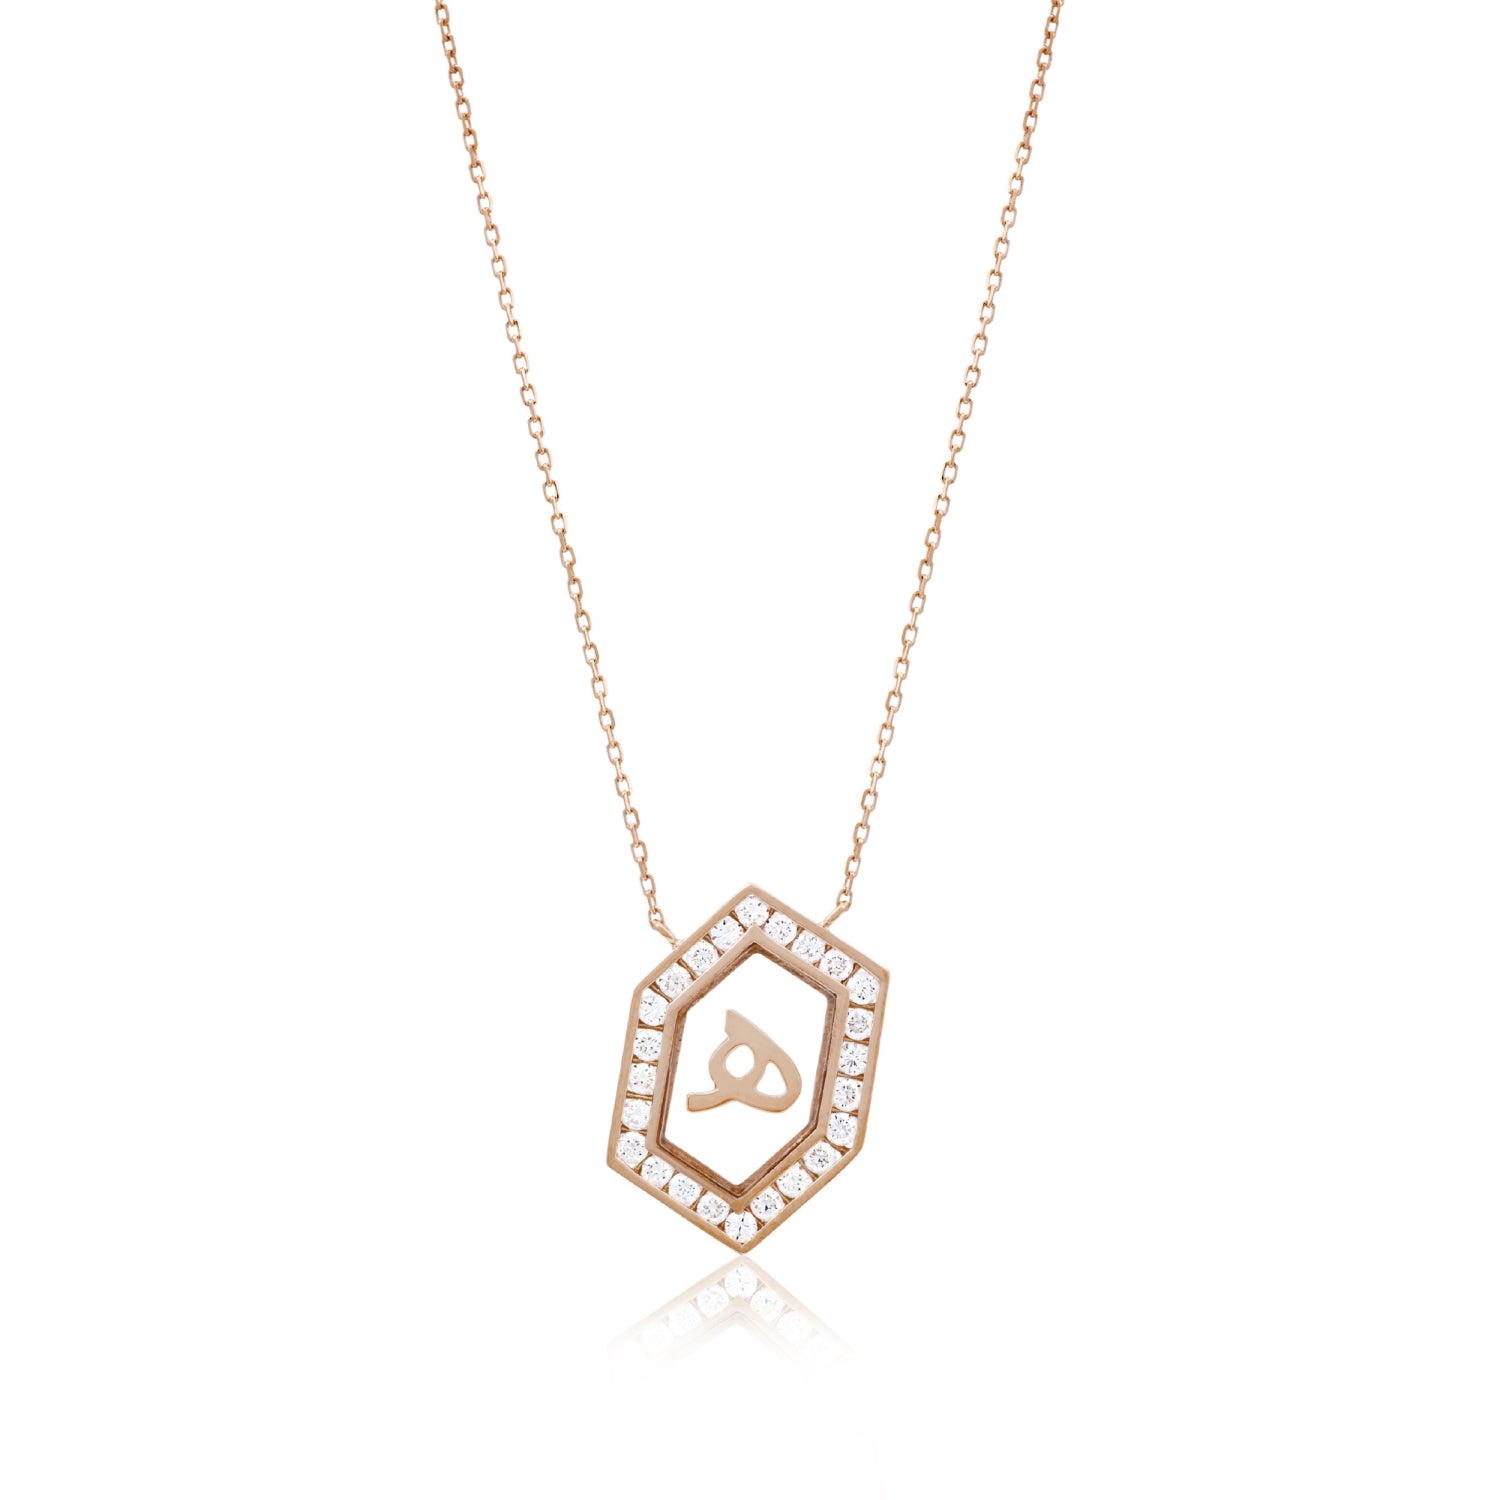 Qamoos 1.0 Letter هـ Diamond Necklace in Rose Gold